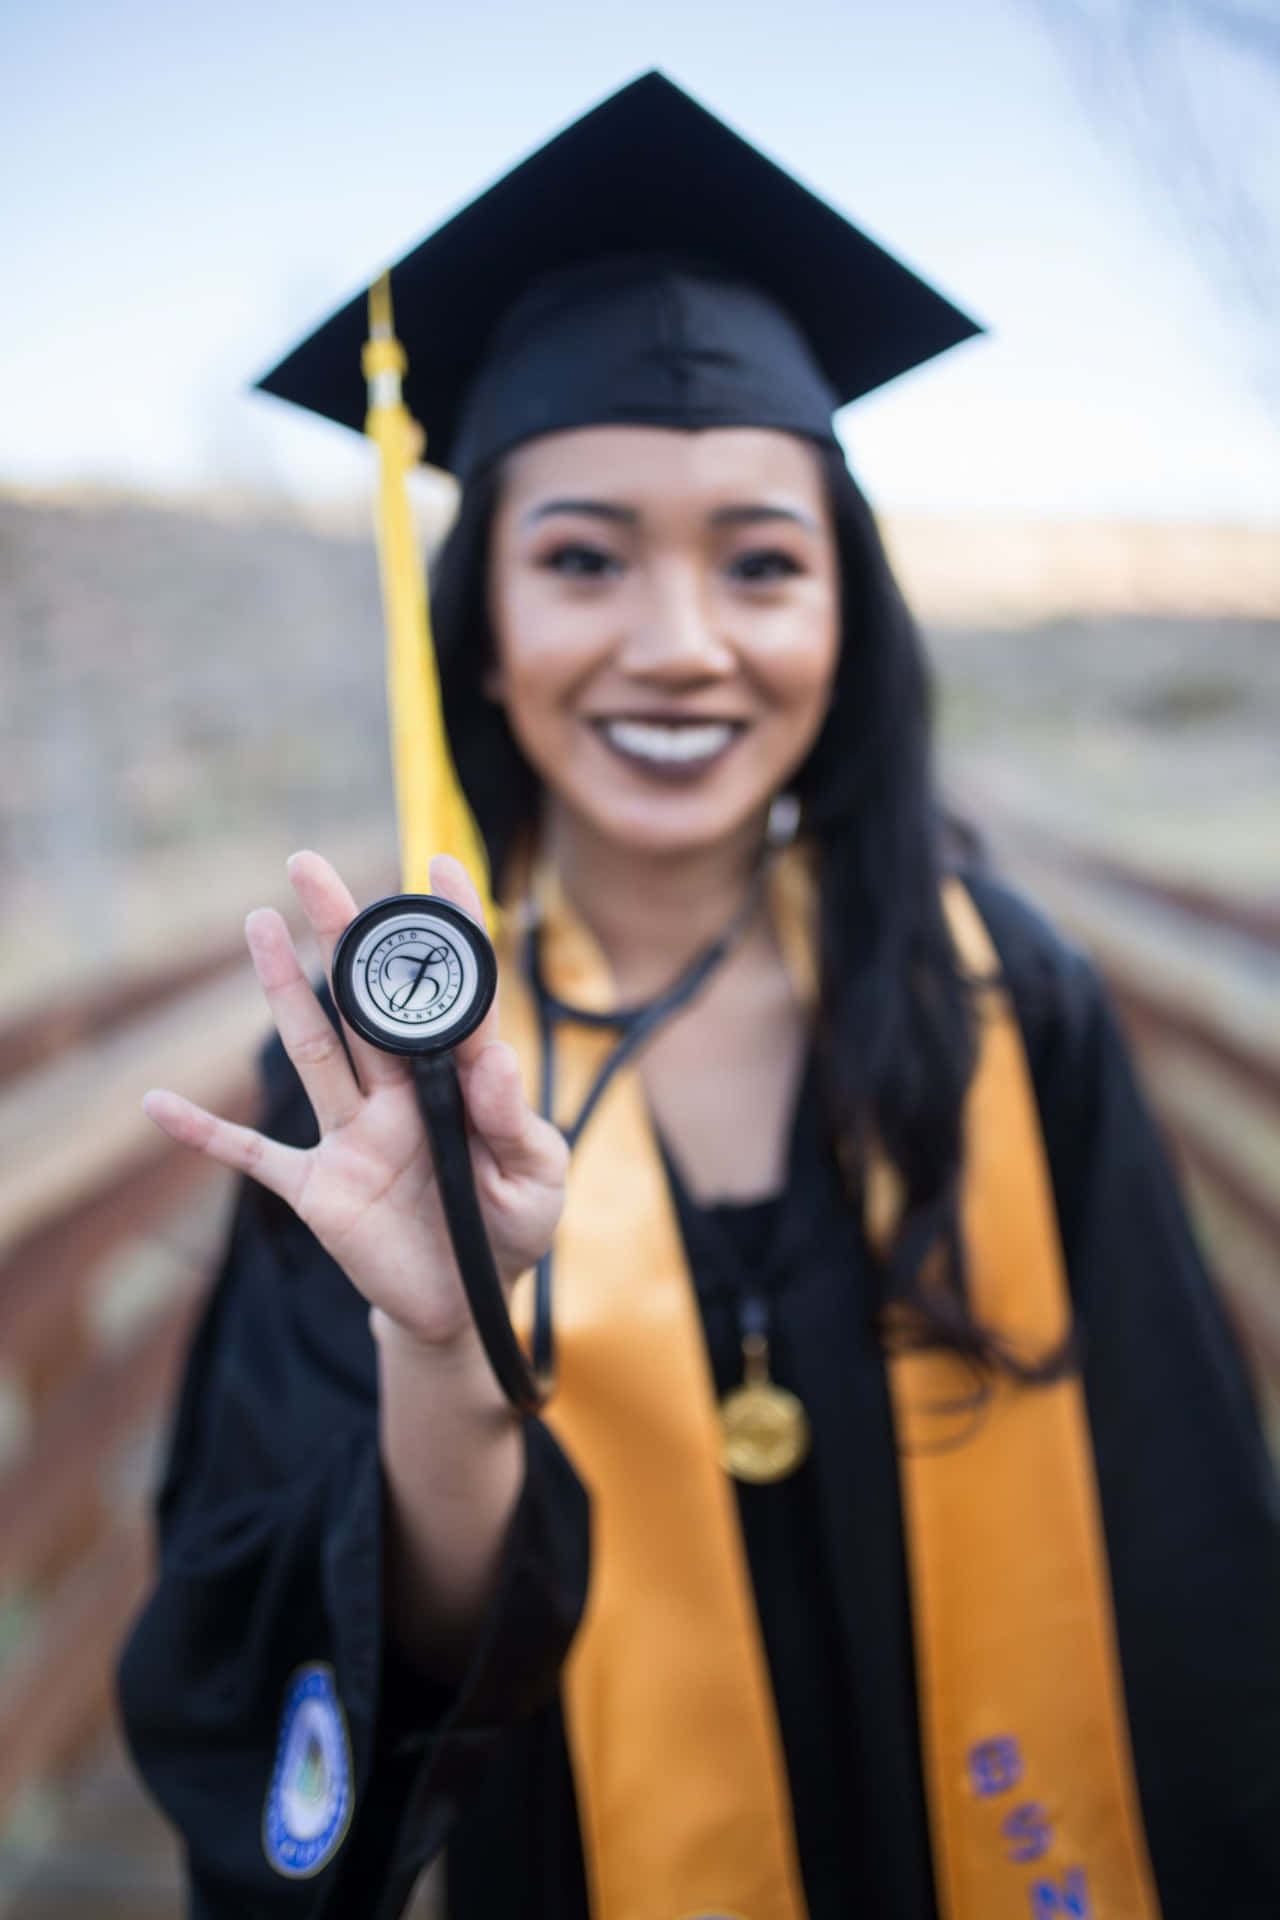 A Young Woman In A Graduation Gown Holding A Stethoscope